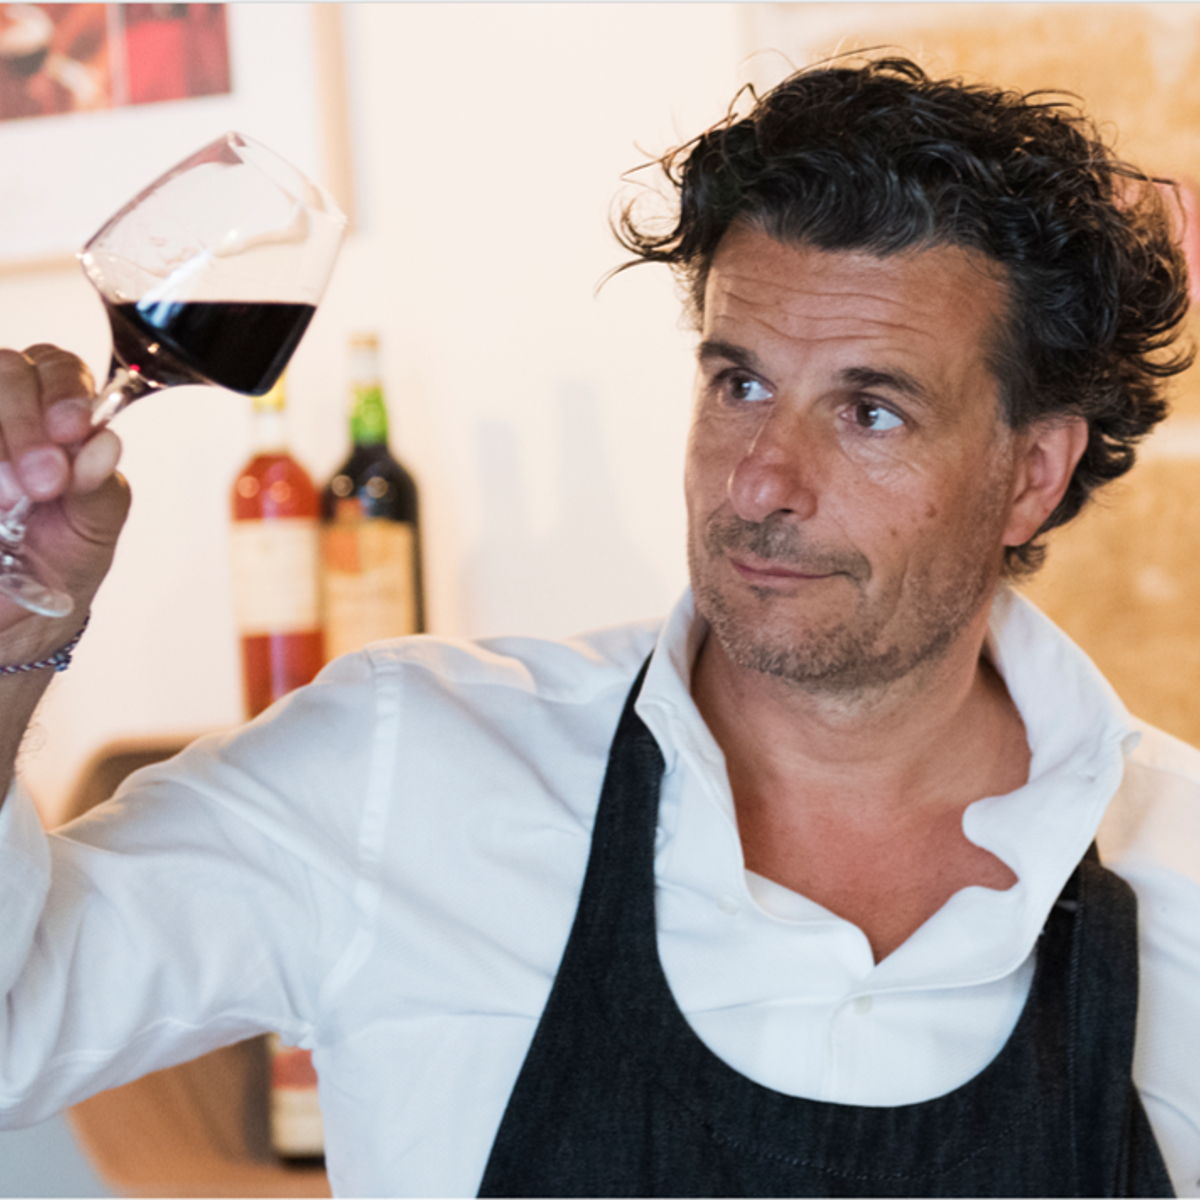 French wine virtual masterclass with a professional sommelier